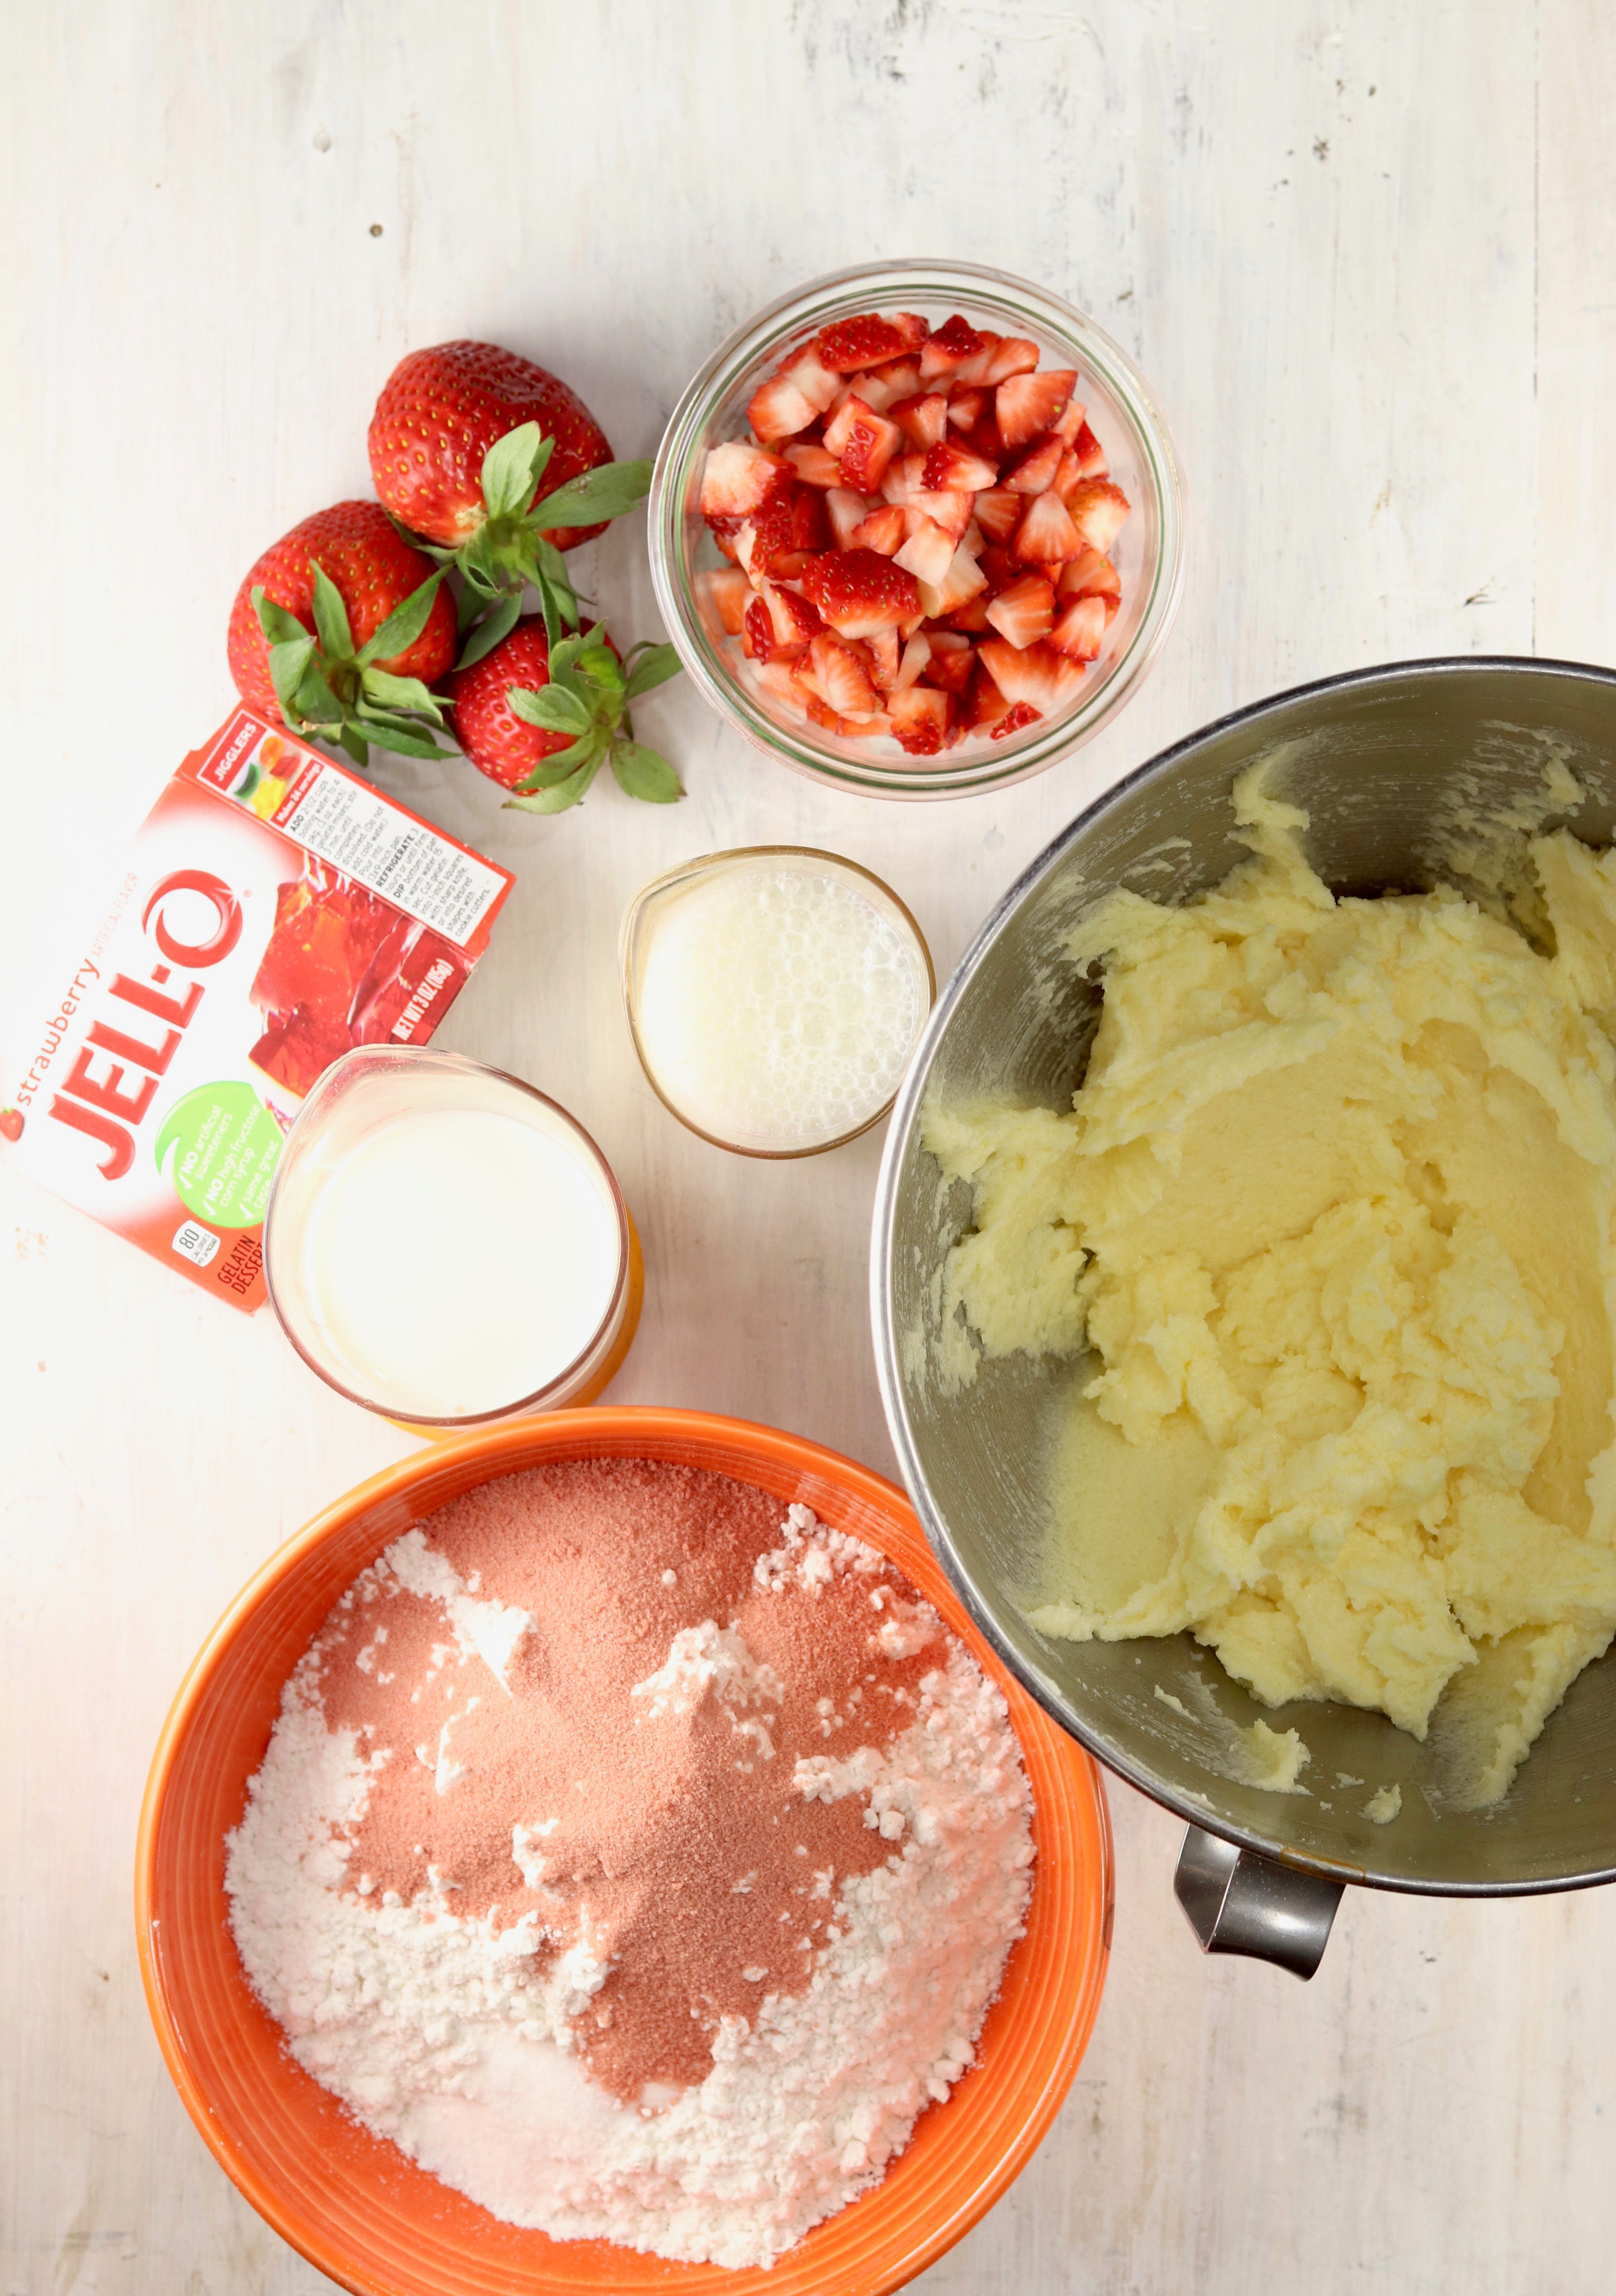 Ingredients for fresh strawberry cake